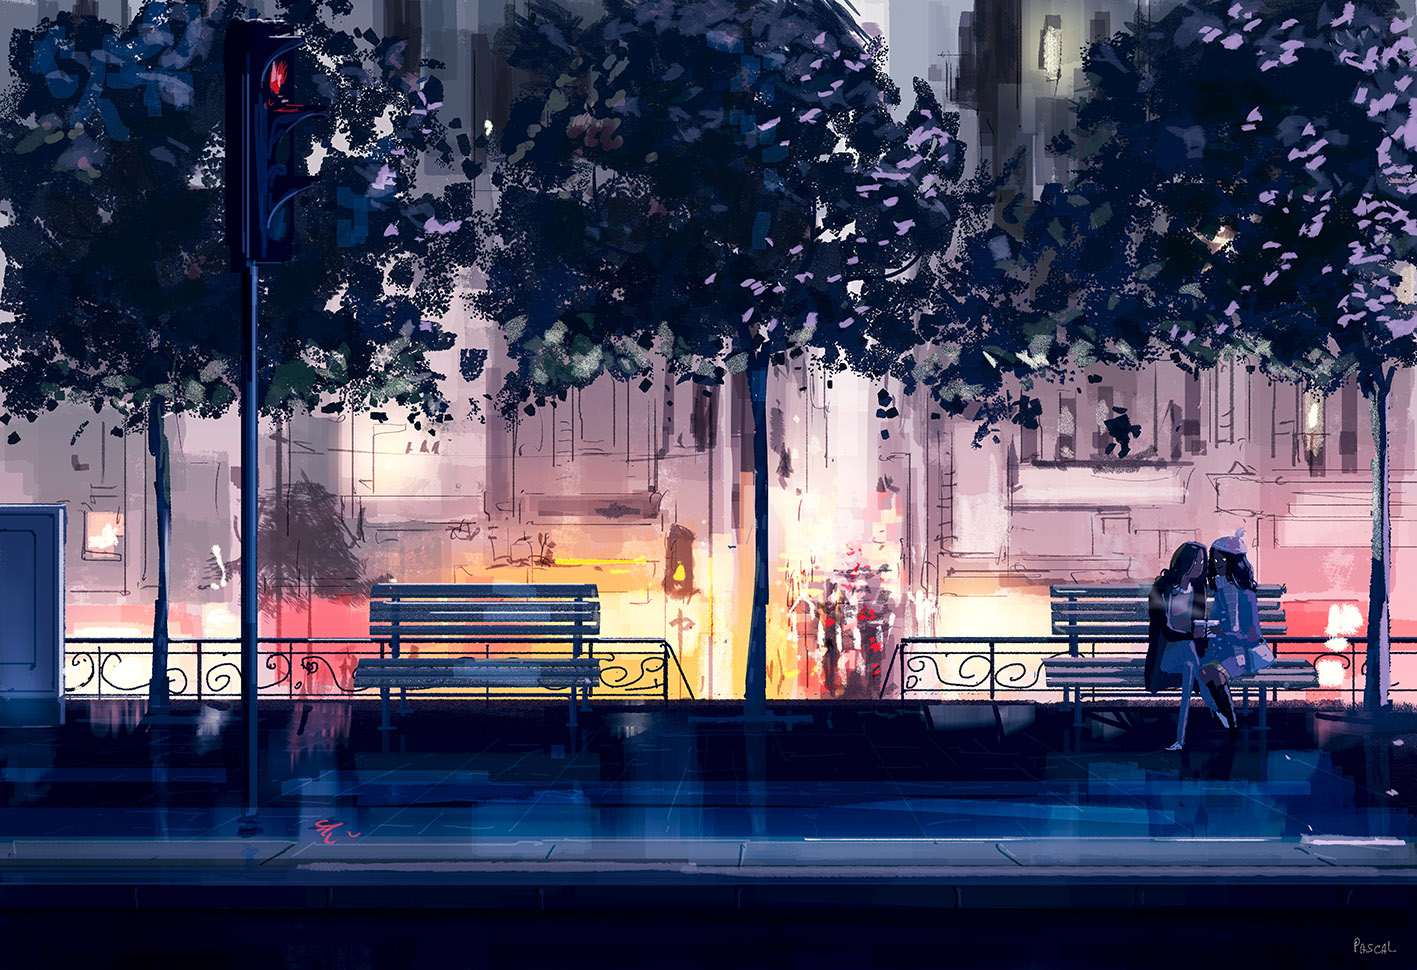 pascal campion: Our own little world